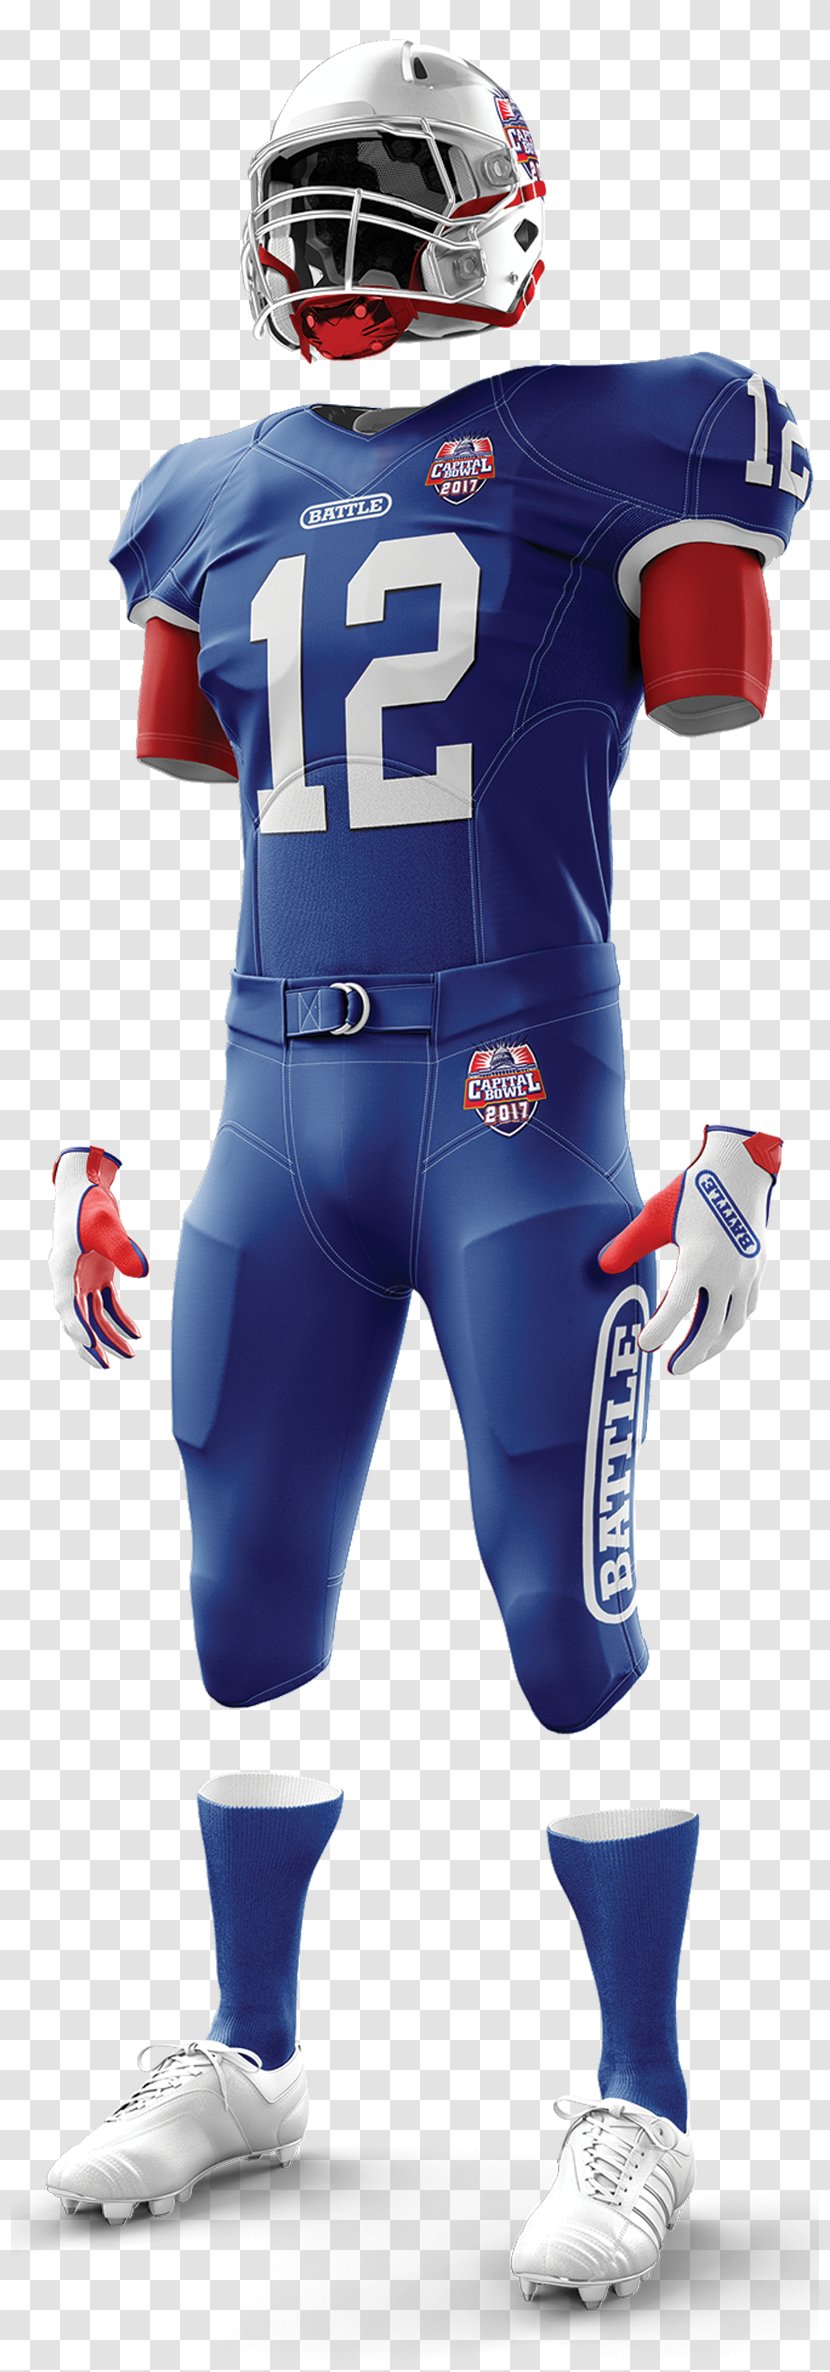 American Football Background - Sports - Gear Sleeve Transparent PNG